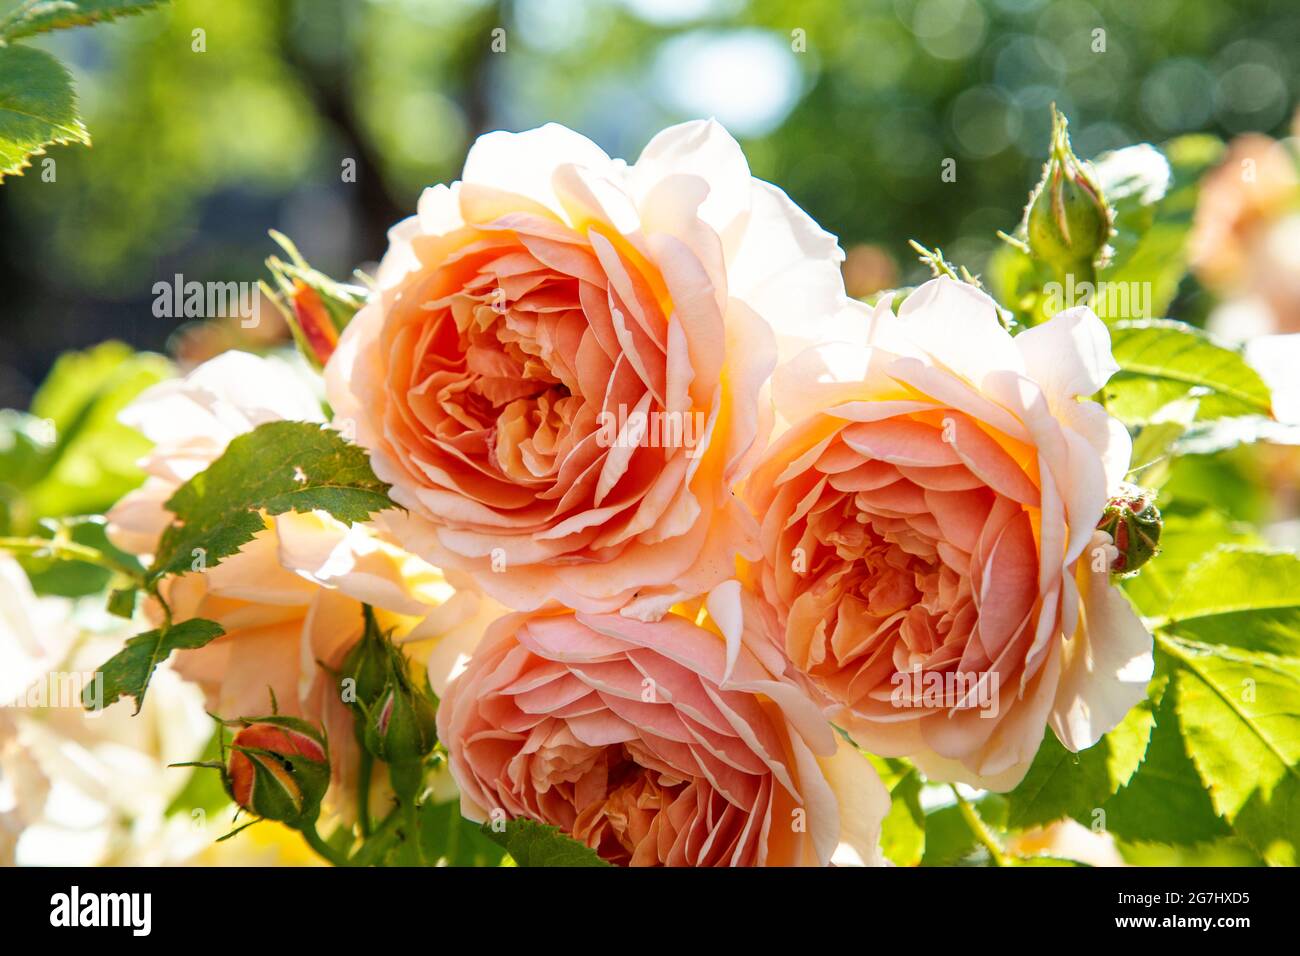 Delicate peach coloured roses in a garden, London, UK Stock Photo